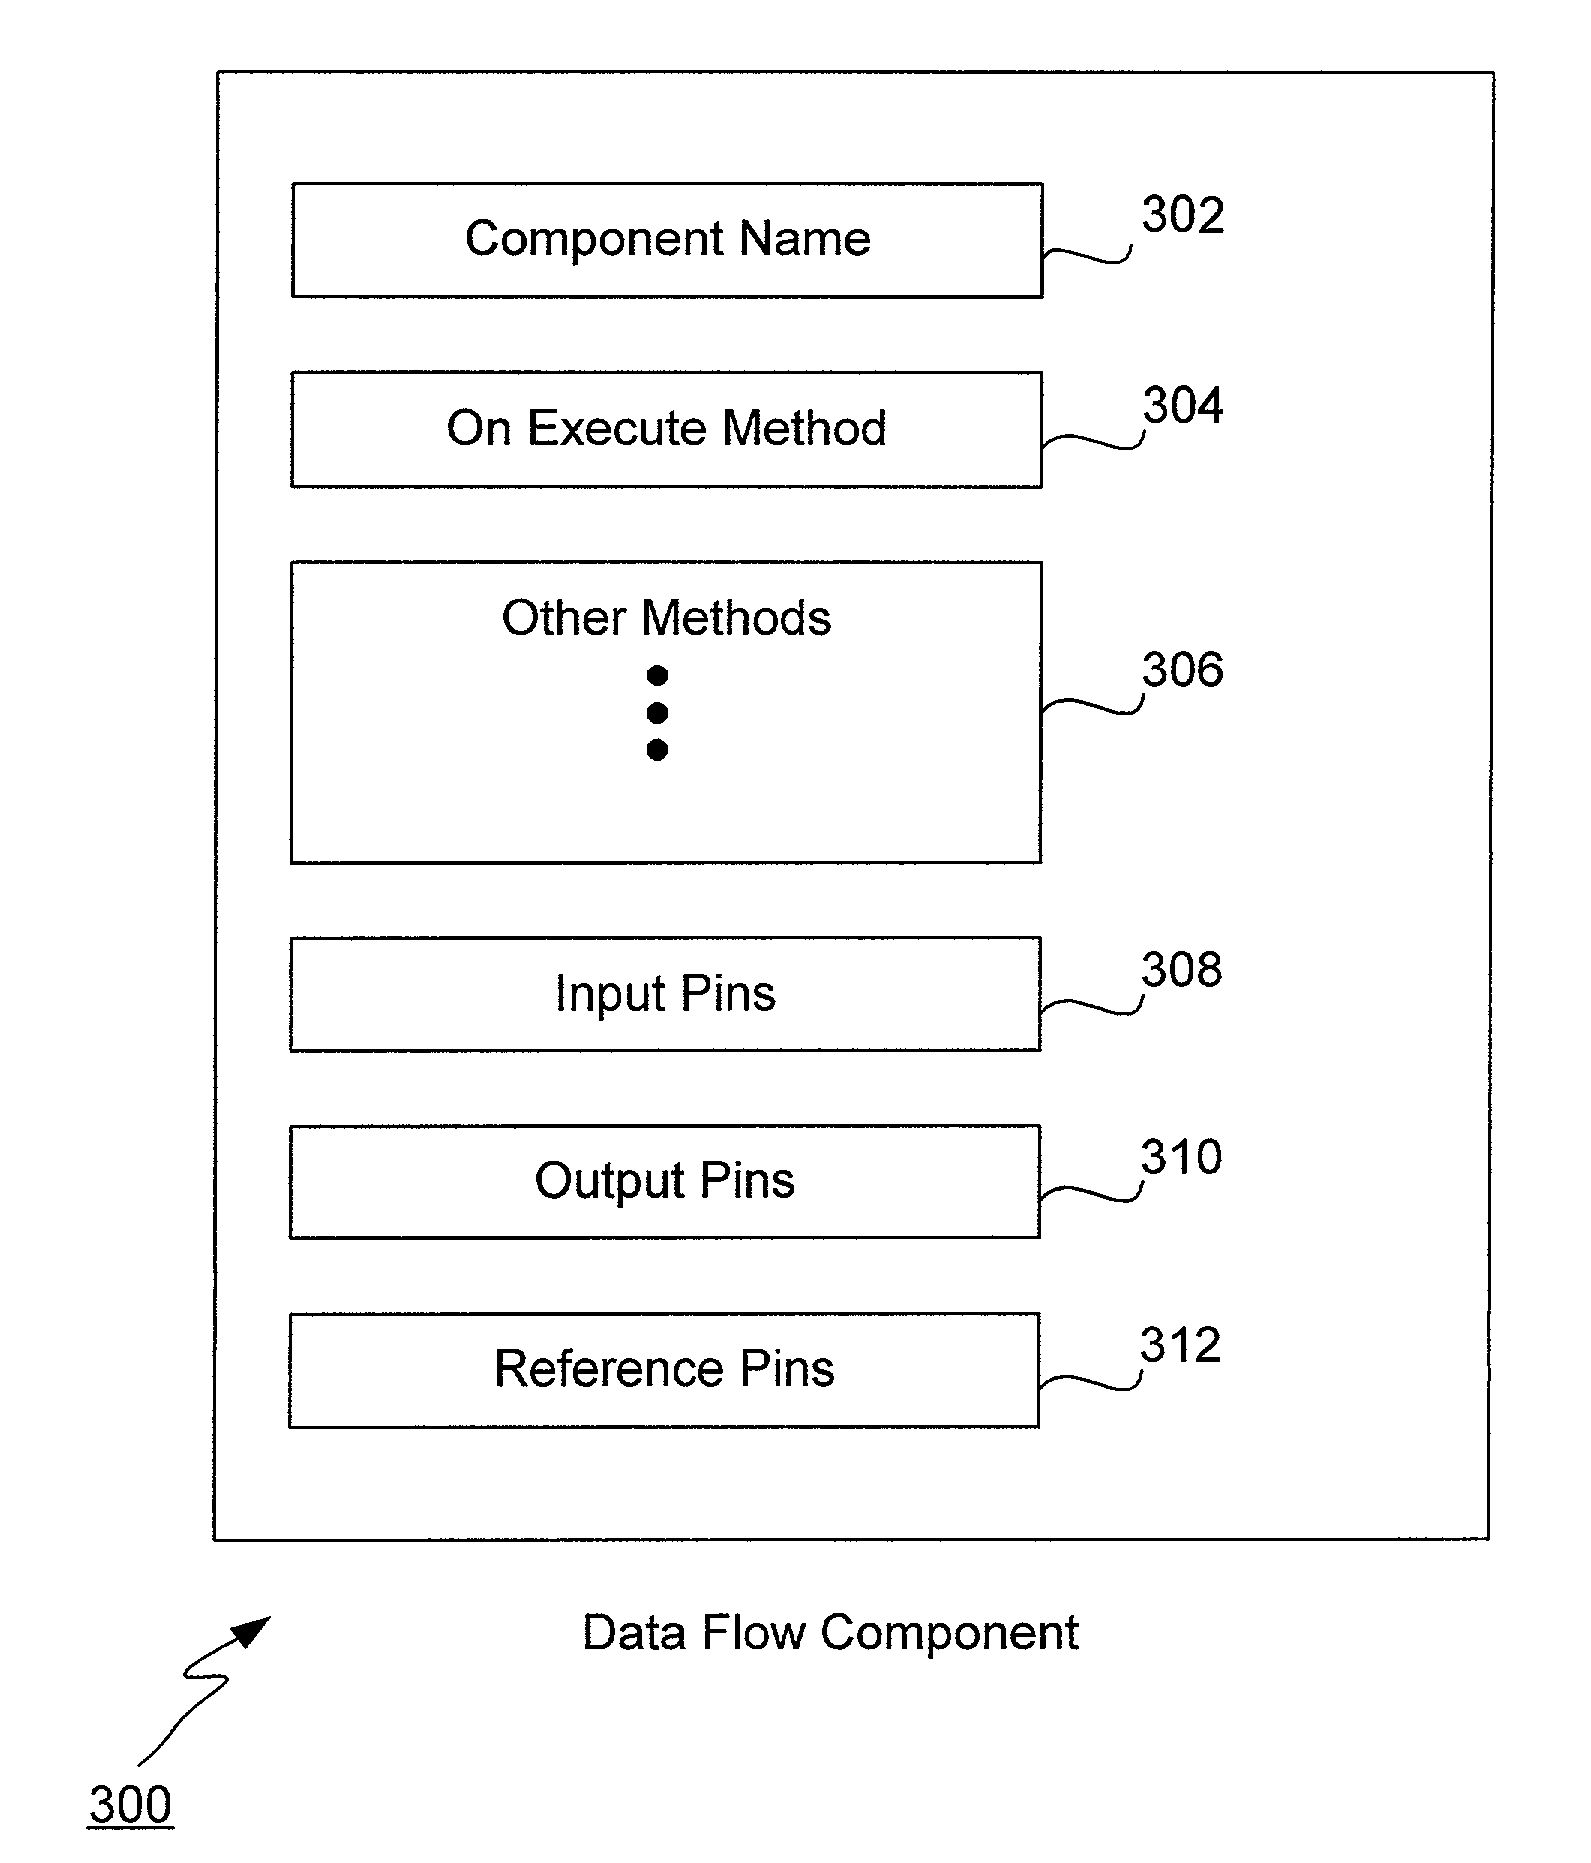 Real-time control system development tool with input pins providing values used by component during execution